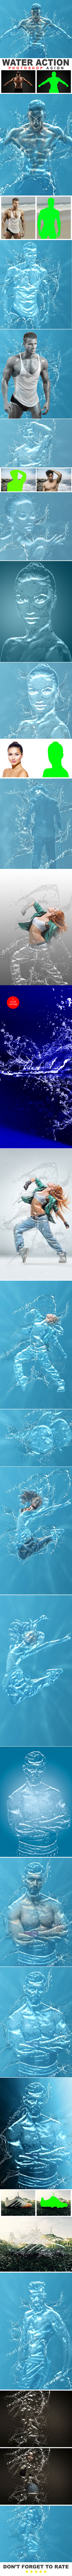 GraphicRiver Water Photoshop Action 20545376